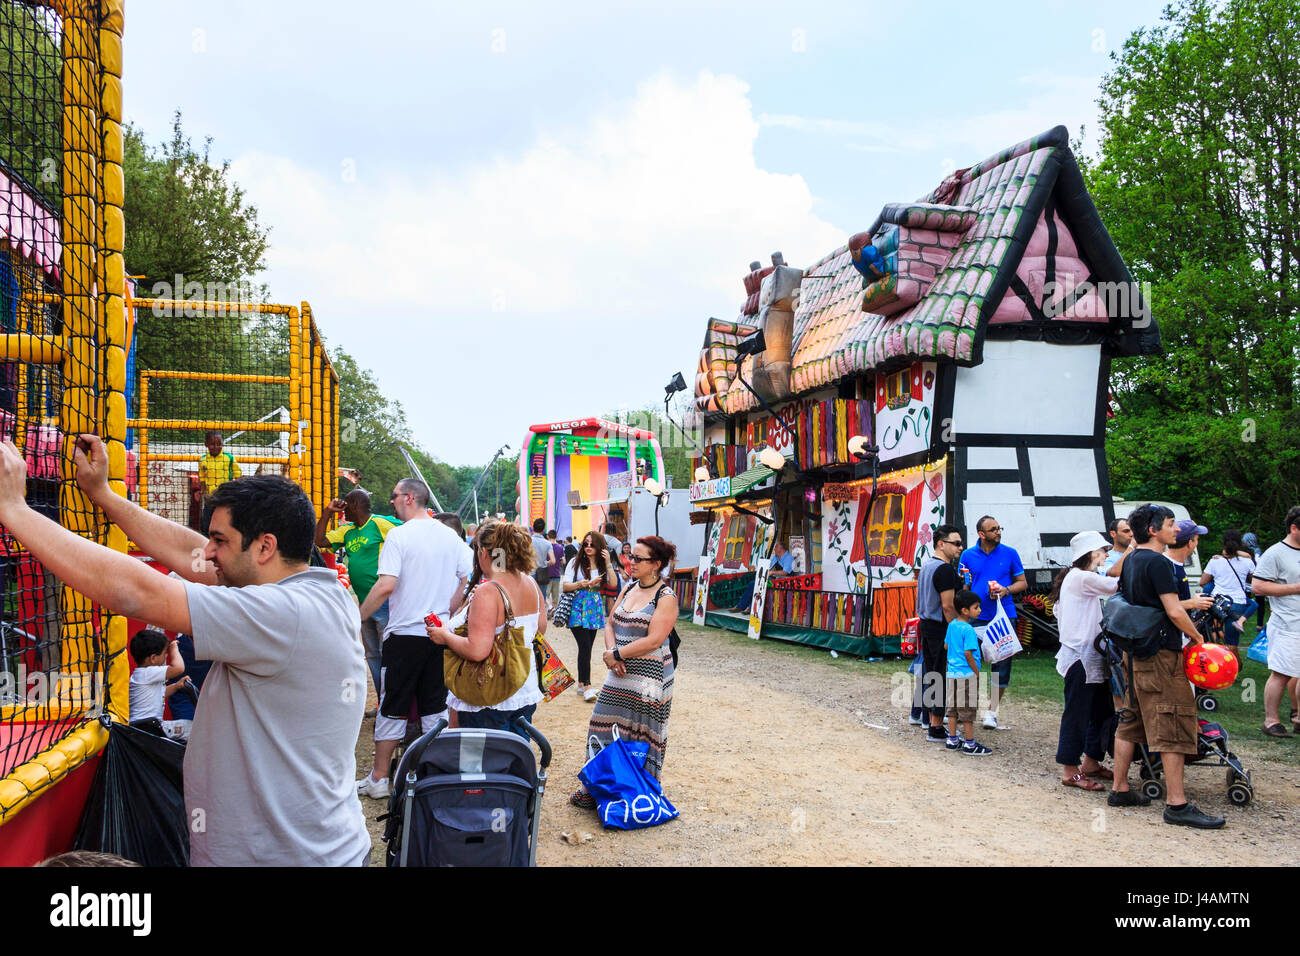 The 'Crooked Cottage' at a bank holiday family funfair, London, UK Stock Photo